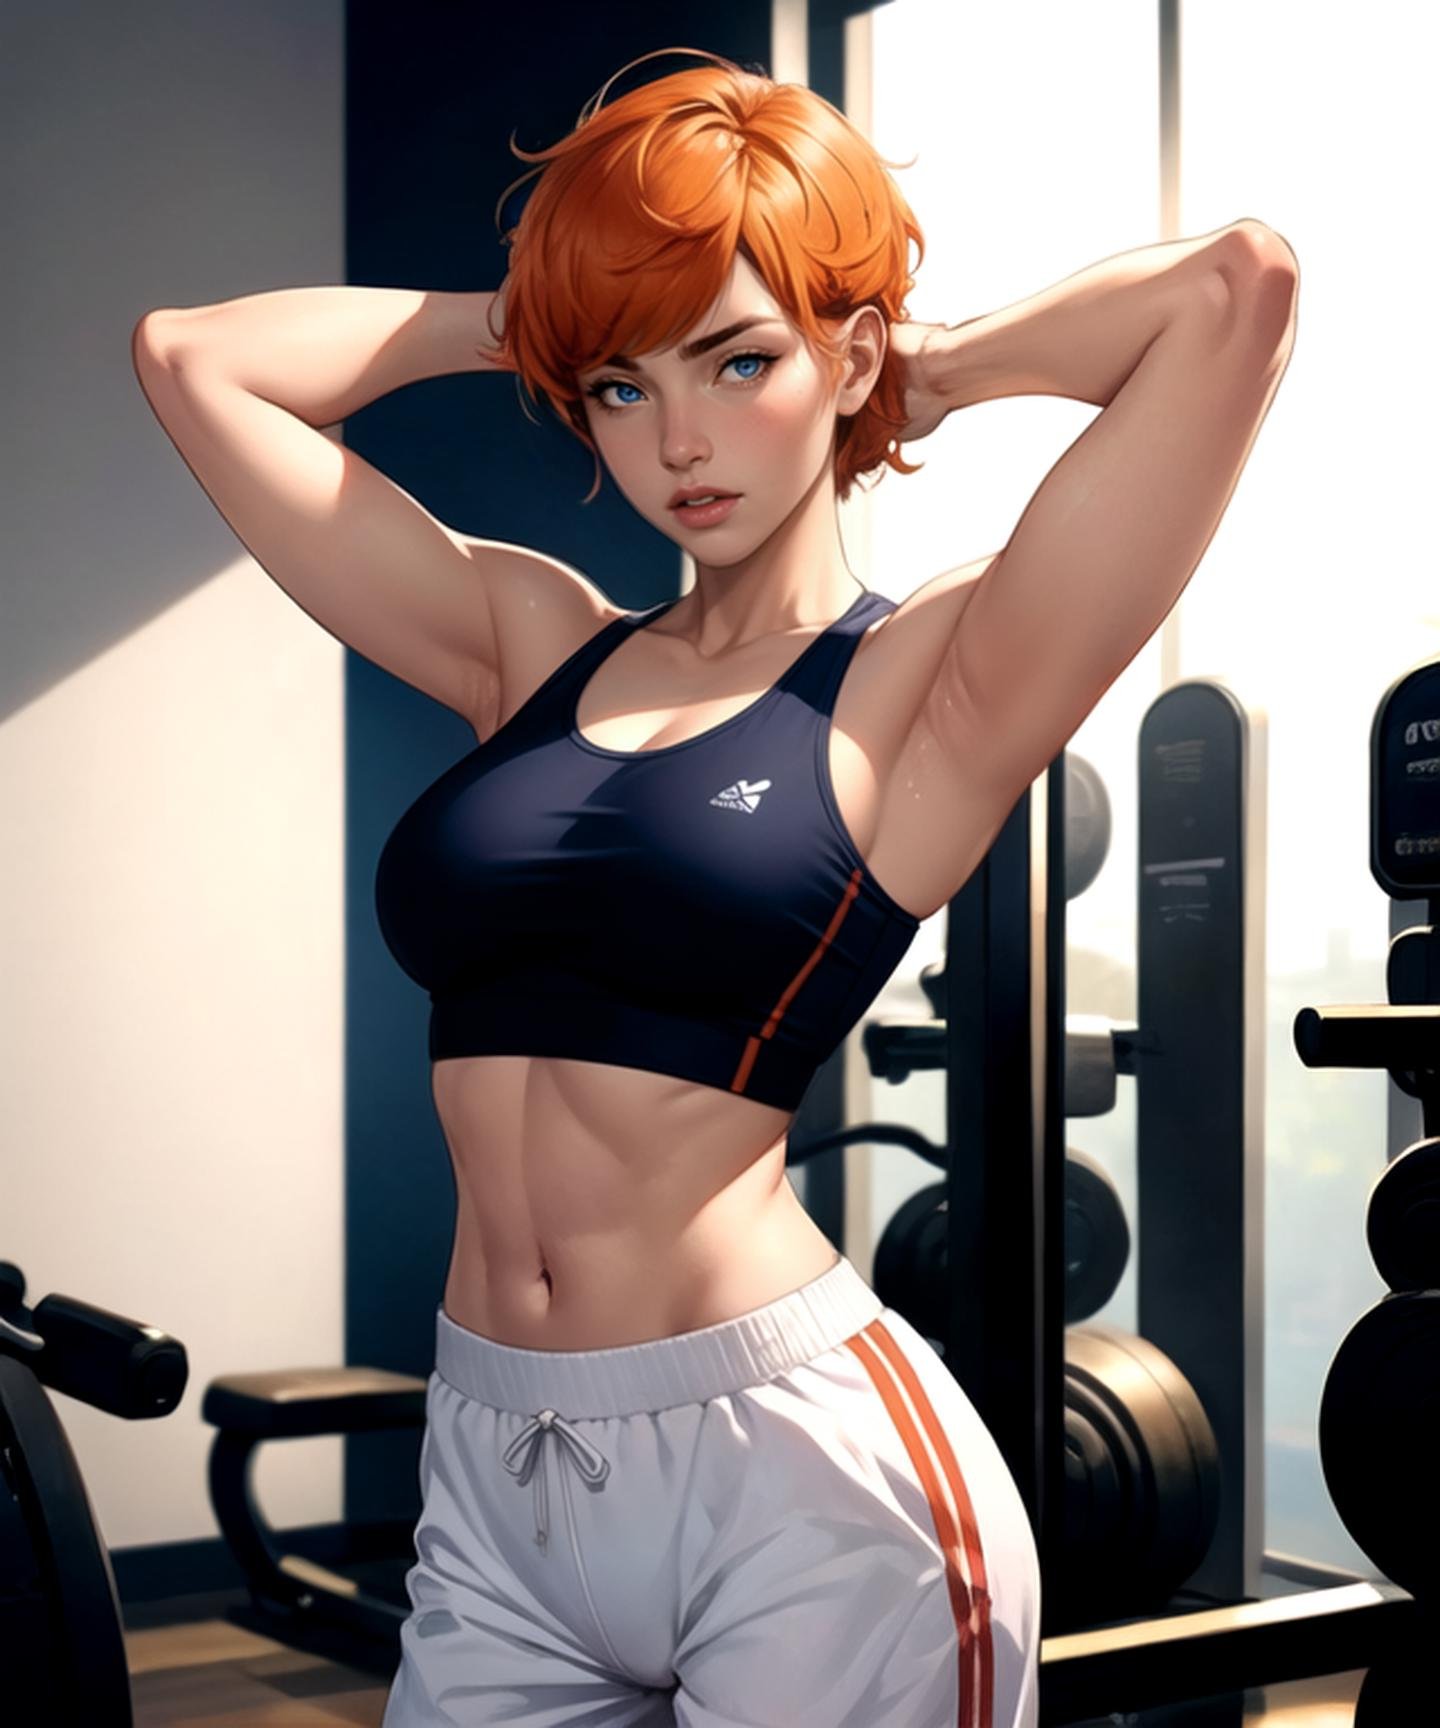 woman, (detailed skin), (perfect face), defined jawline, beautiful lips, (beautiful bright blue eyes), (short spiky haircut, bangs, orange hair), (perfect anatomy), (athletic body), (sexy), (navy blue sports bra with white accents), (loose baggy white sweatpants with blue accents), (standing, hands behind head), (smooth armpits), (looking at viewer), (medium shot photograph), (gym background, gym equipment), realistic